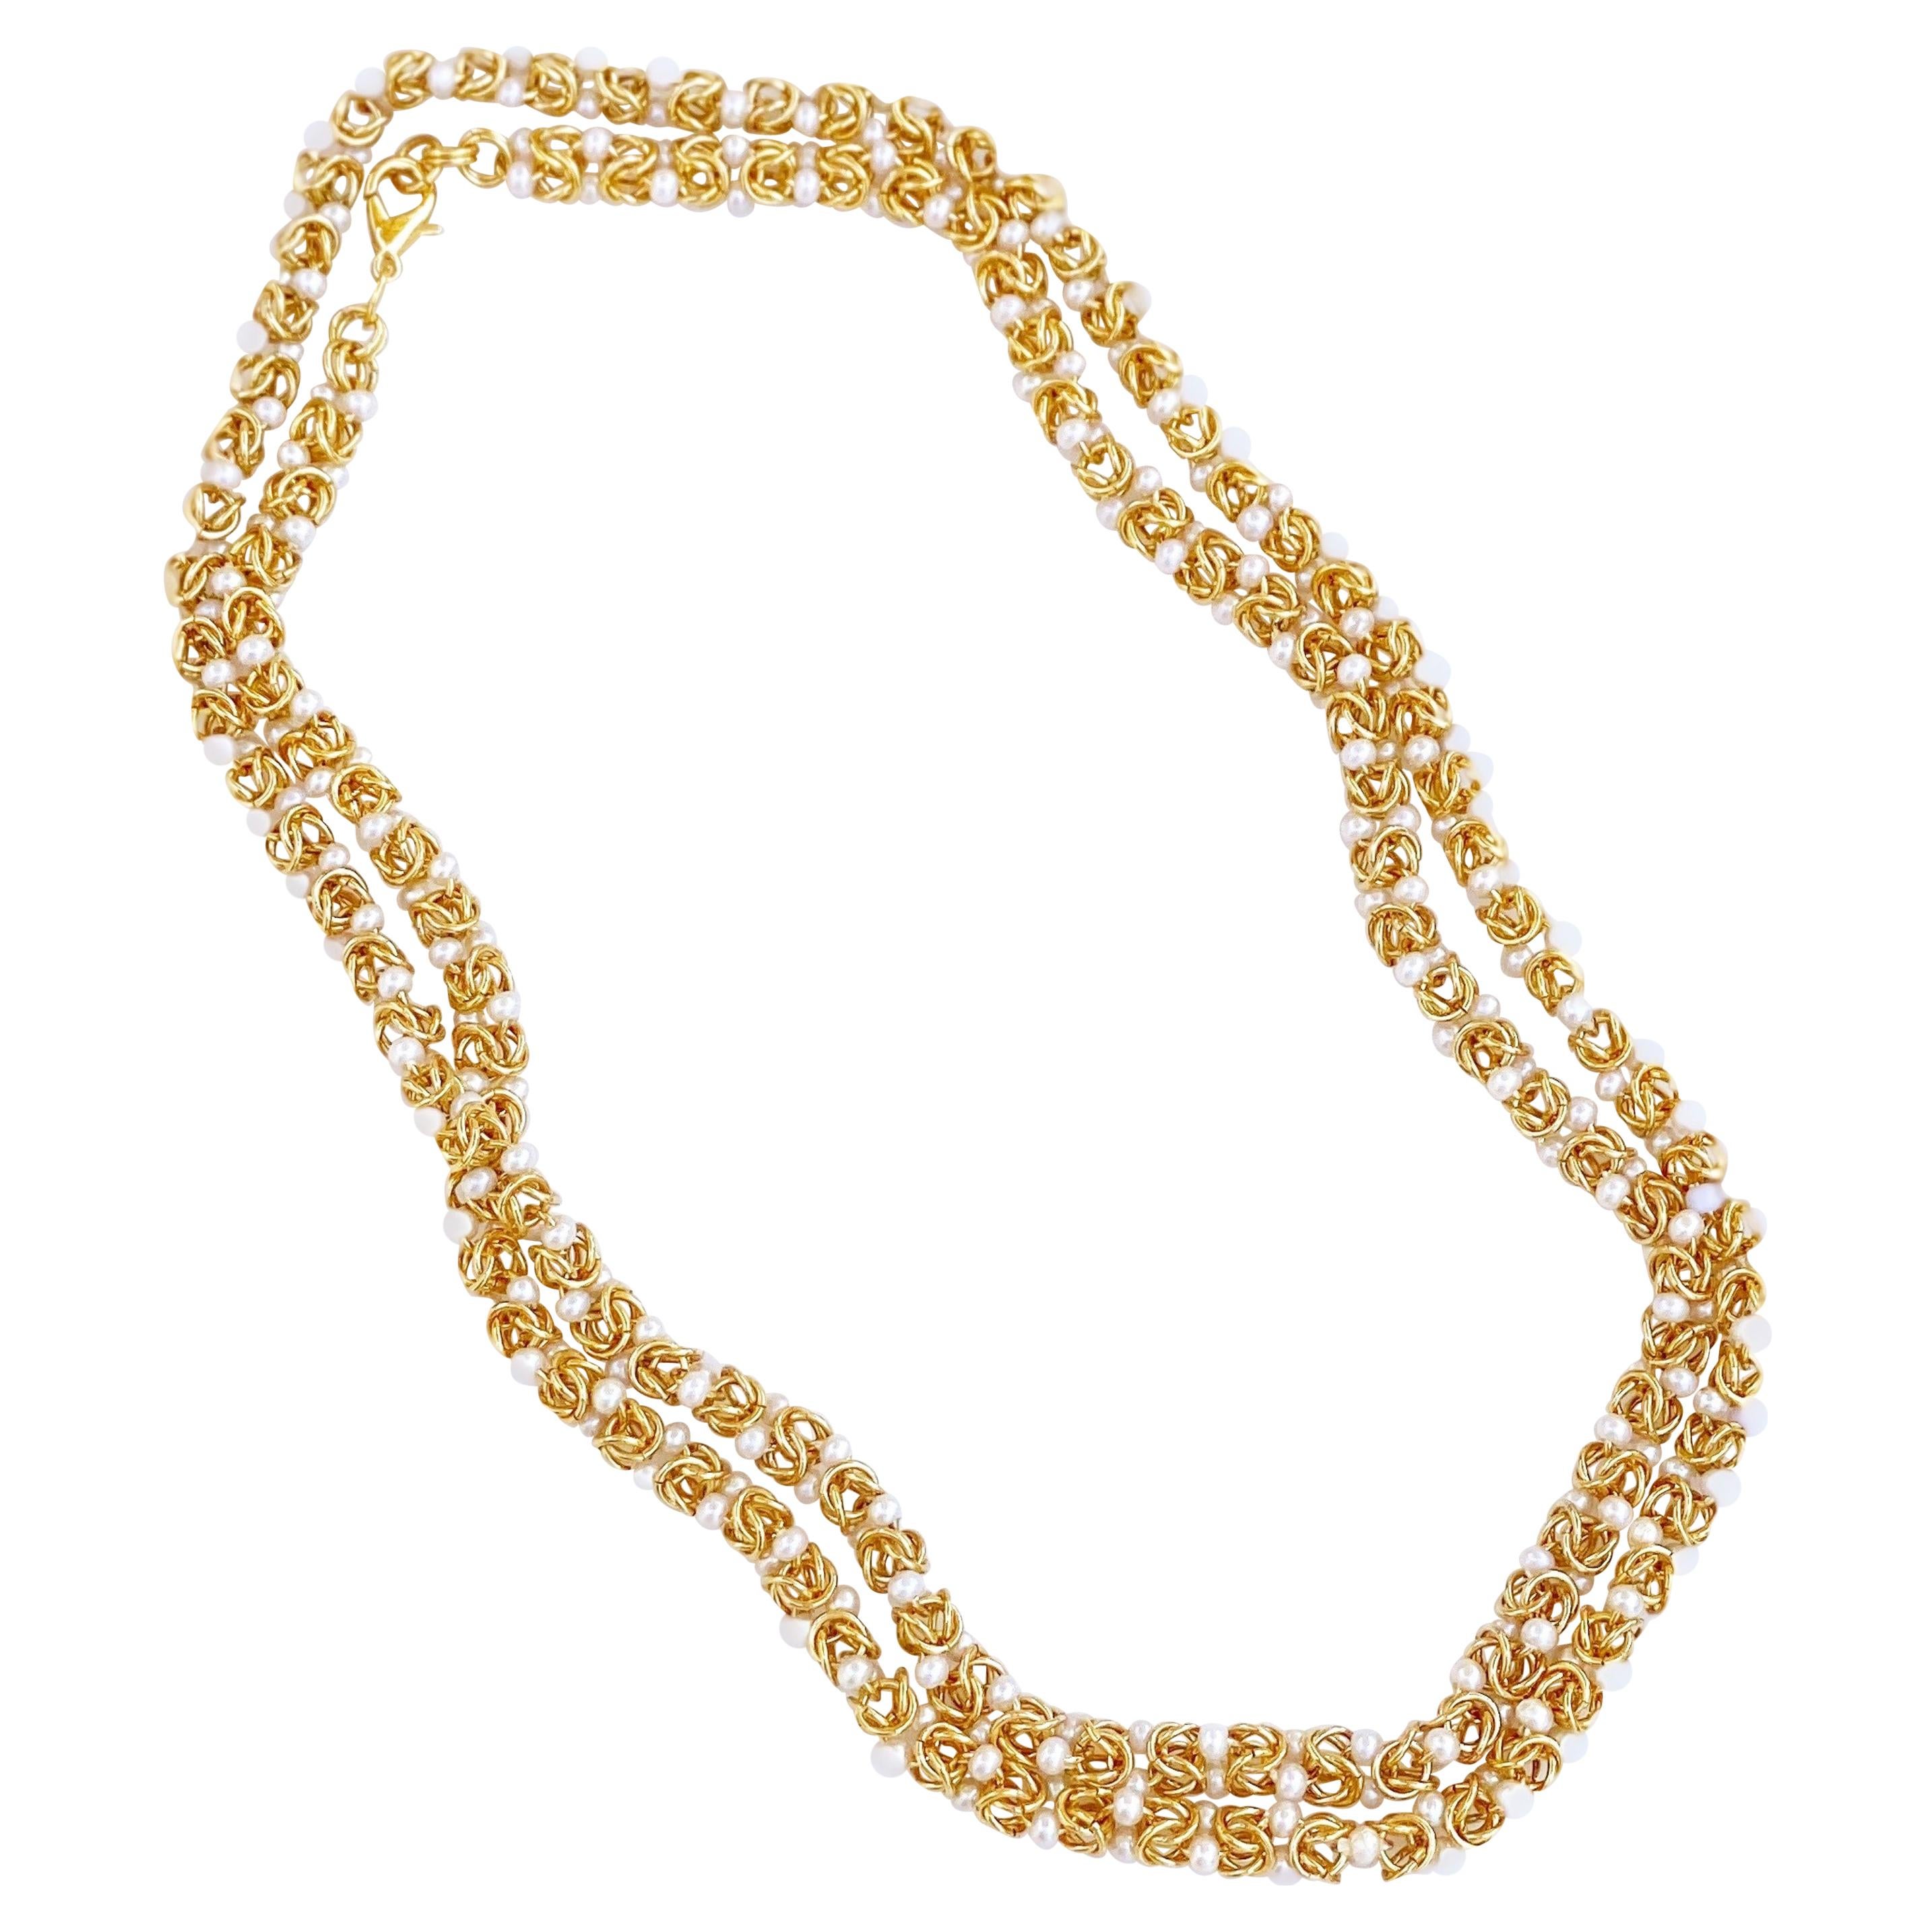 36" Gold Byzantine Chain Necklace With Woven Pearls, 1980s